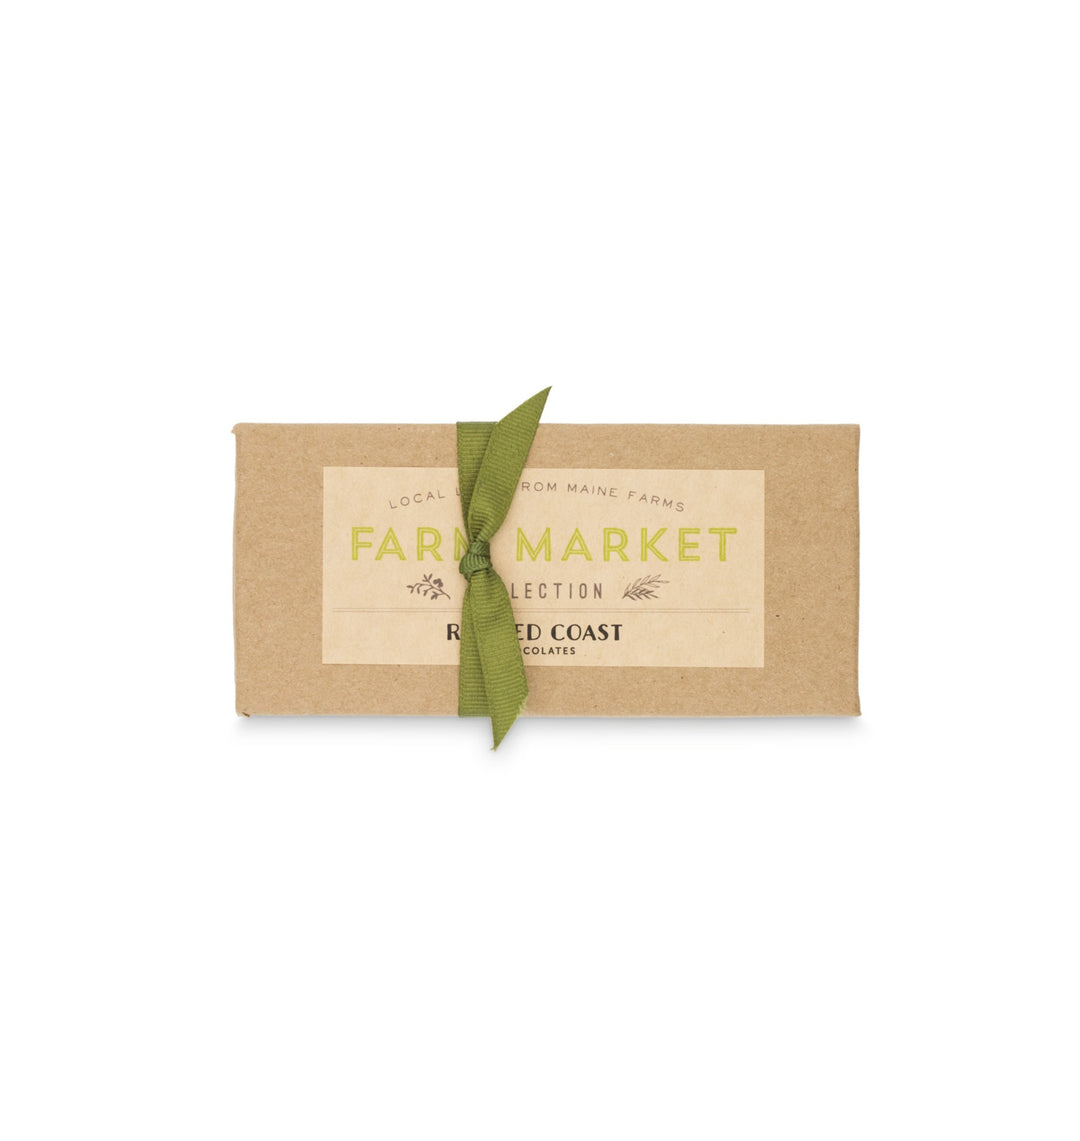 A bar of Ragged Coast Chocolates Maine Farm Market Truffle Collection with a green leaf on its brown paper packaging, displayed on a plain white background.